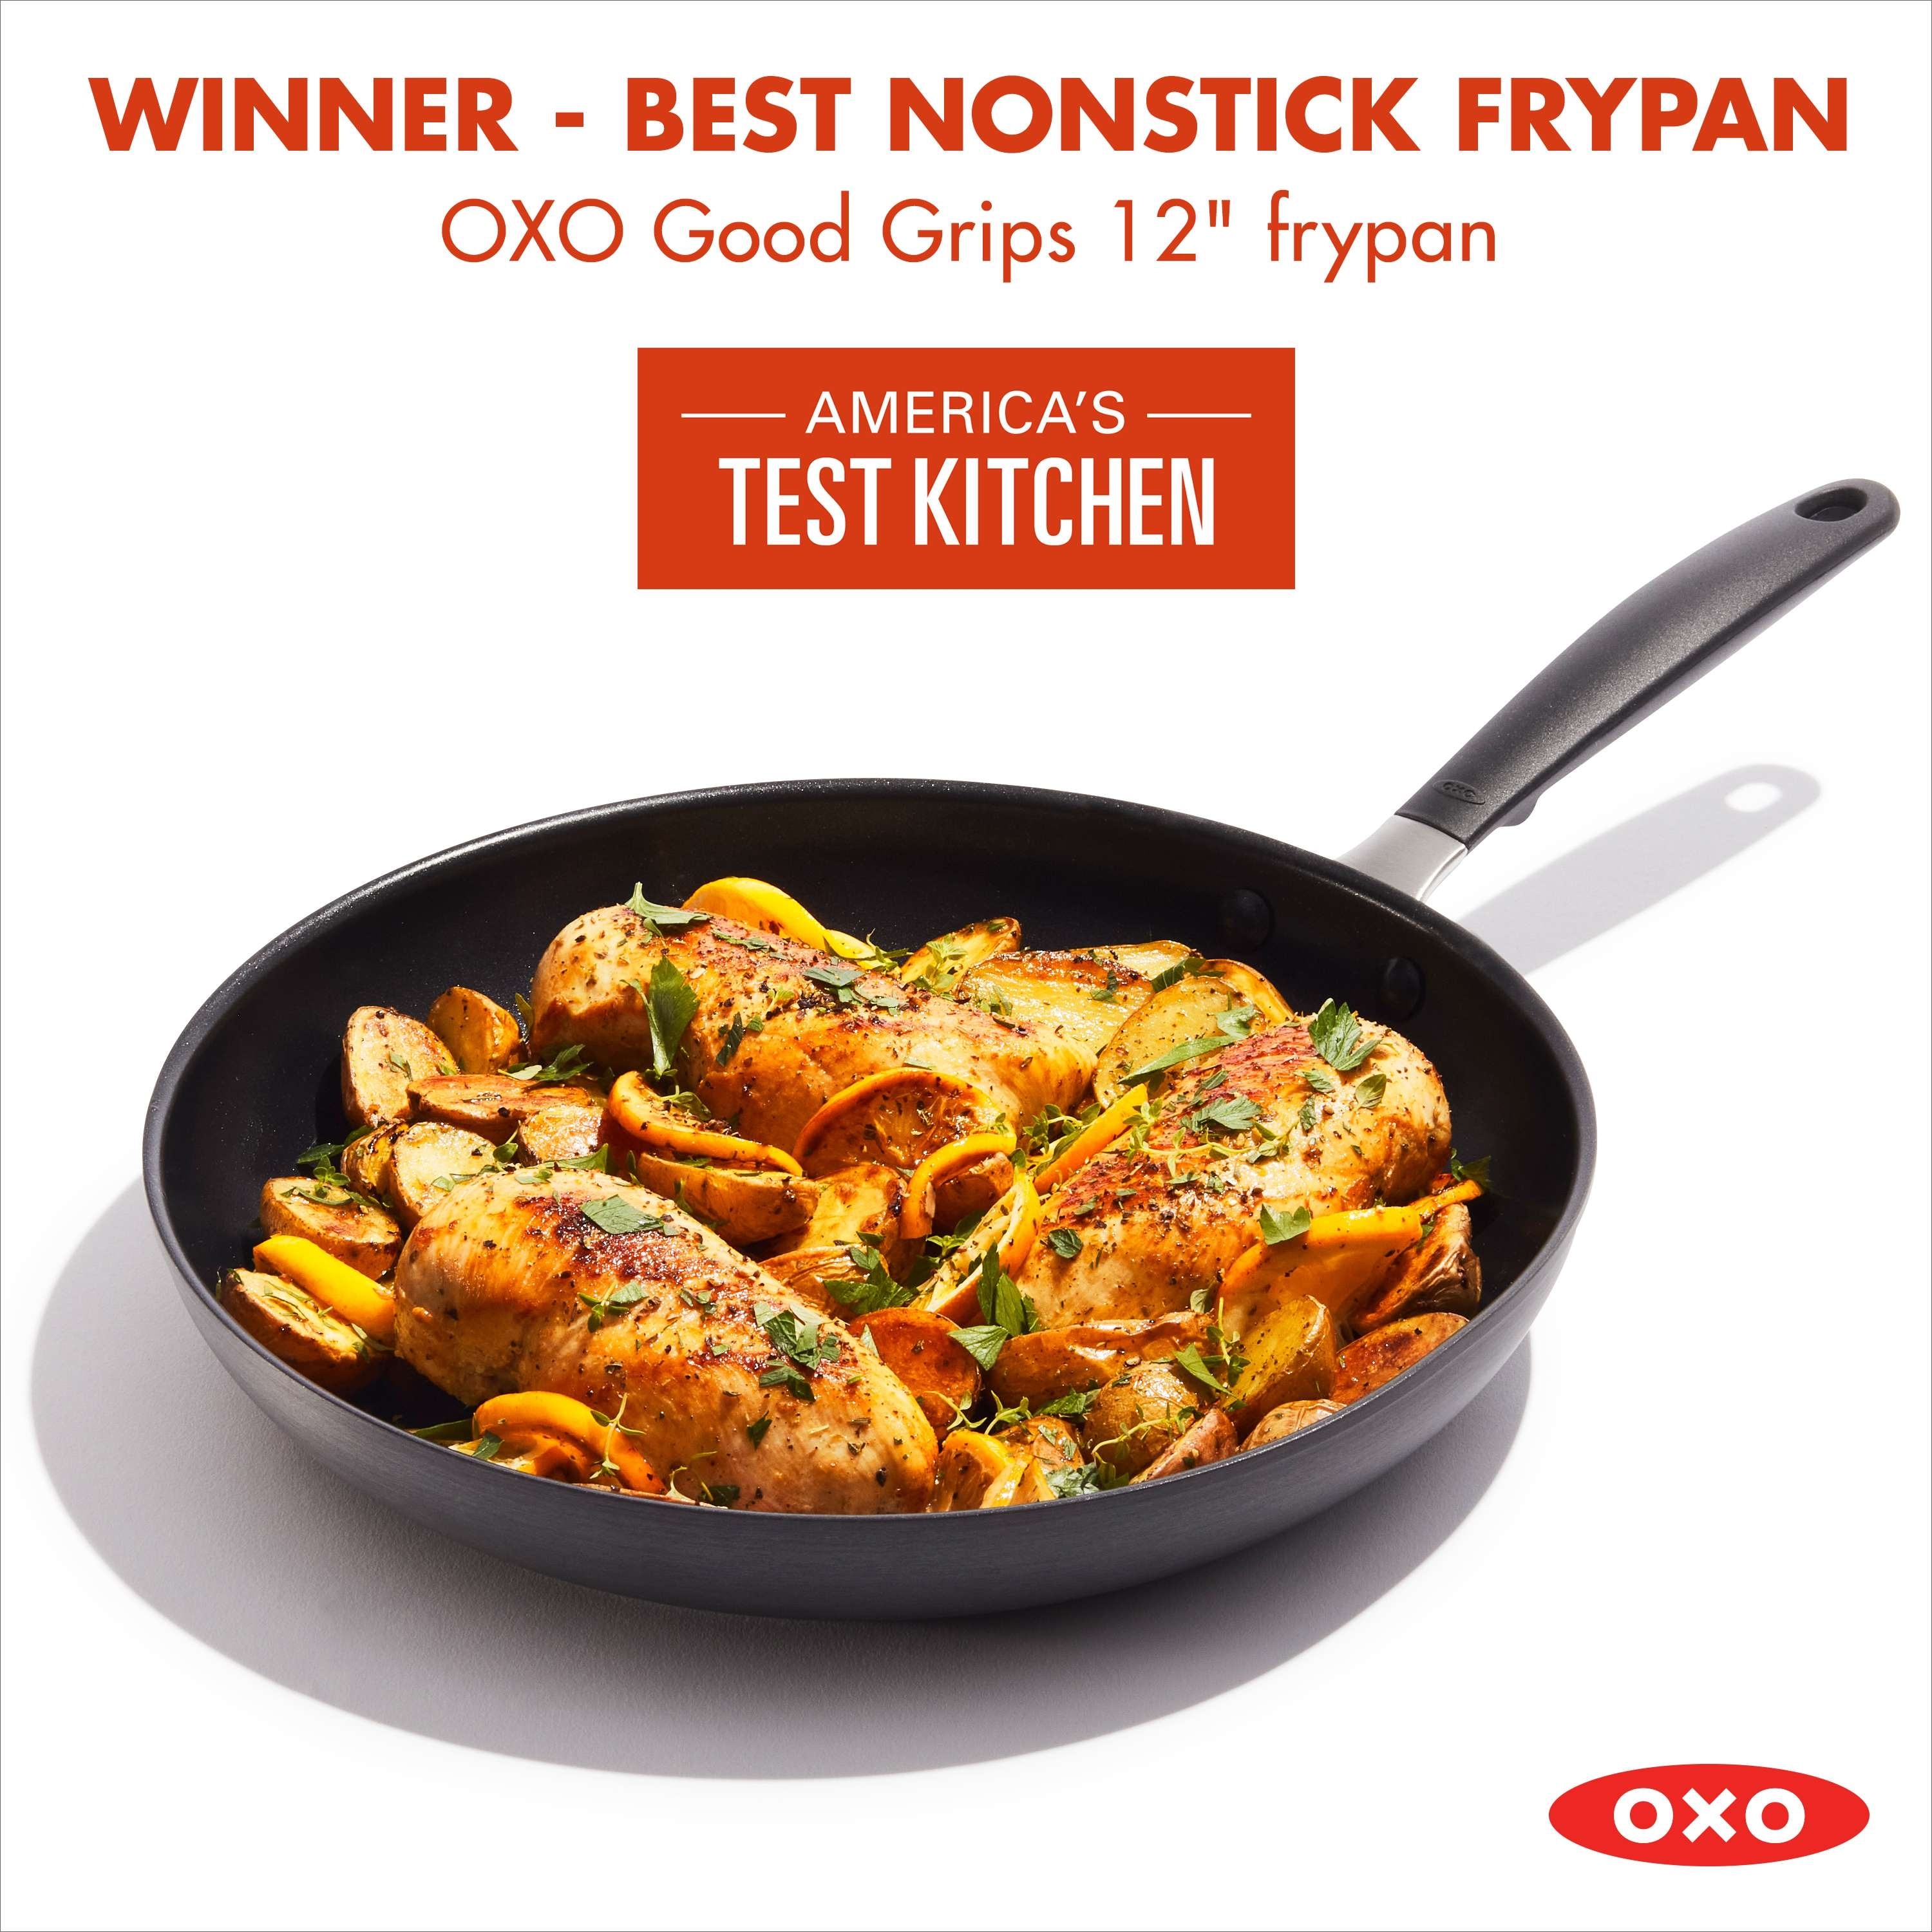 https://ak1.ostkcdn.com/images/products/is/images/direct/9cdc8f52571c5856f4ff67031912cfdddff2accf/OXO-Good-Grip-Non-Stick-Open-Frypan.jpg